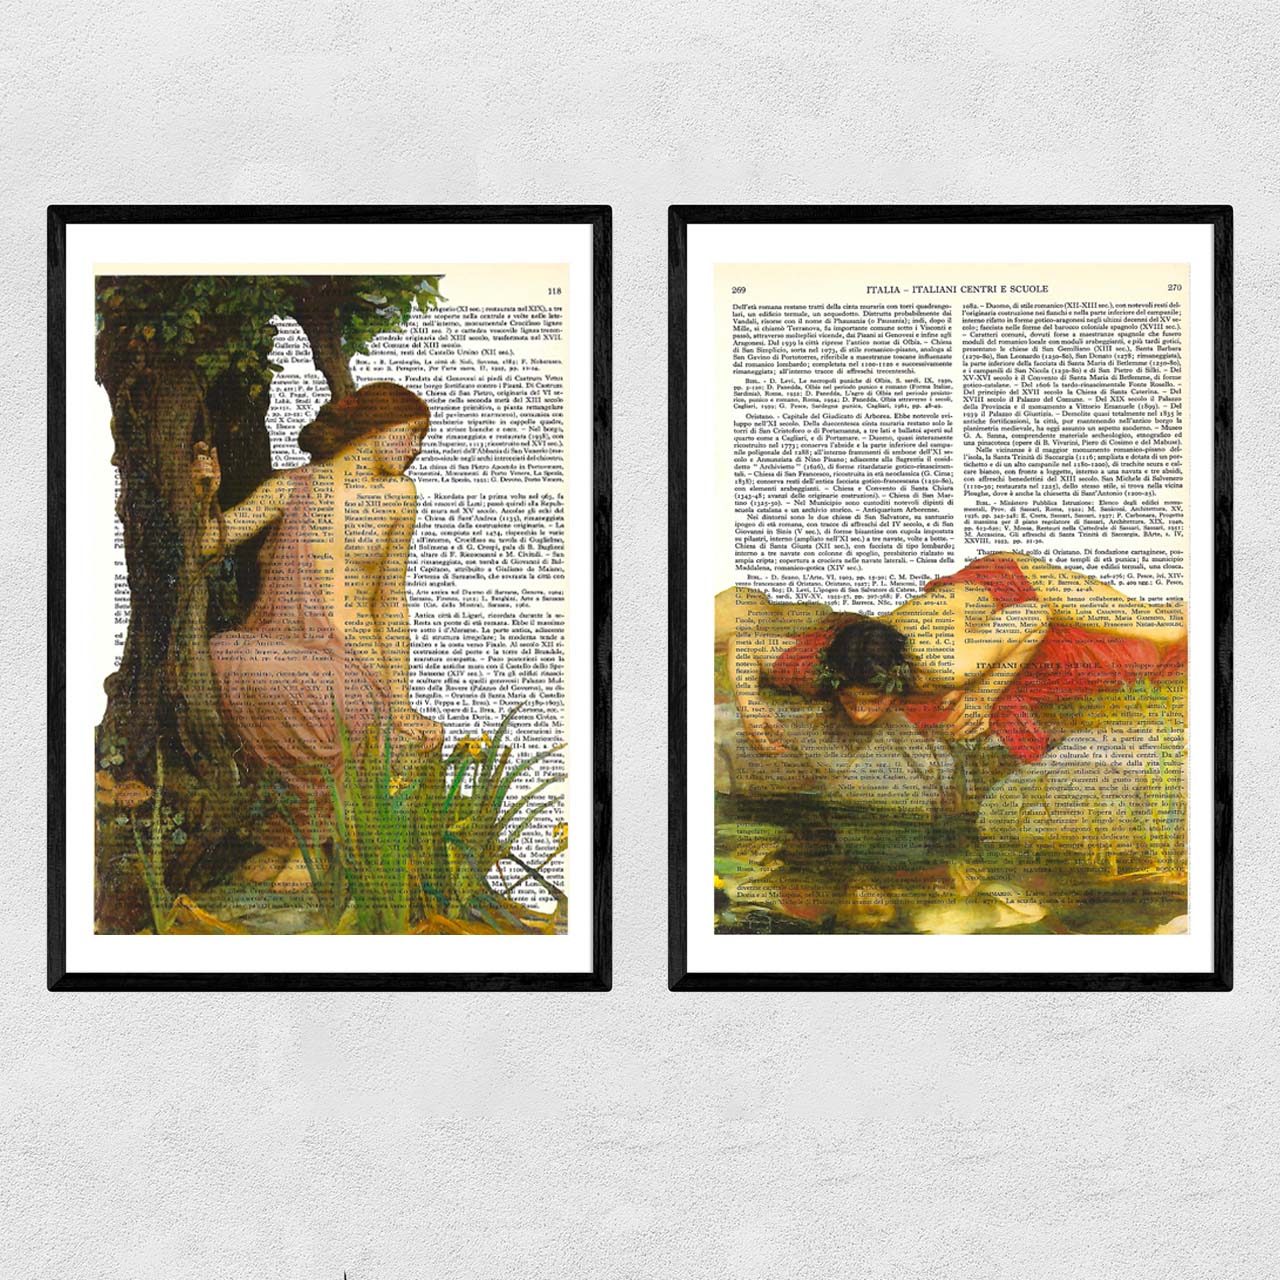 Mix-up: Echo and Narcissus – Waterhouse